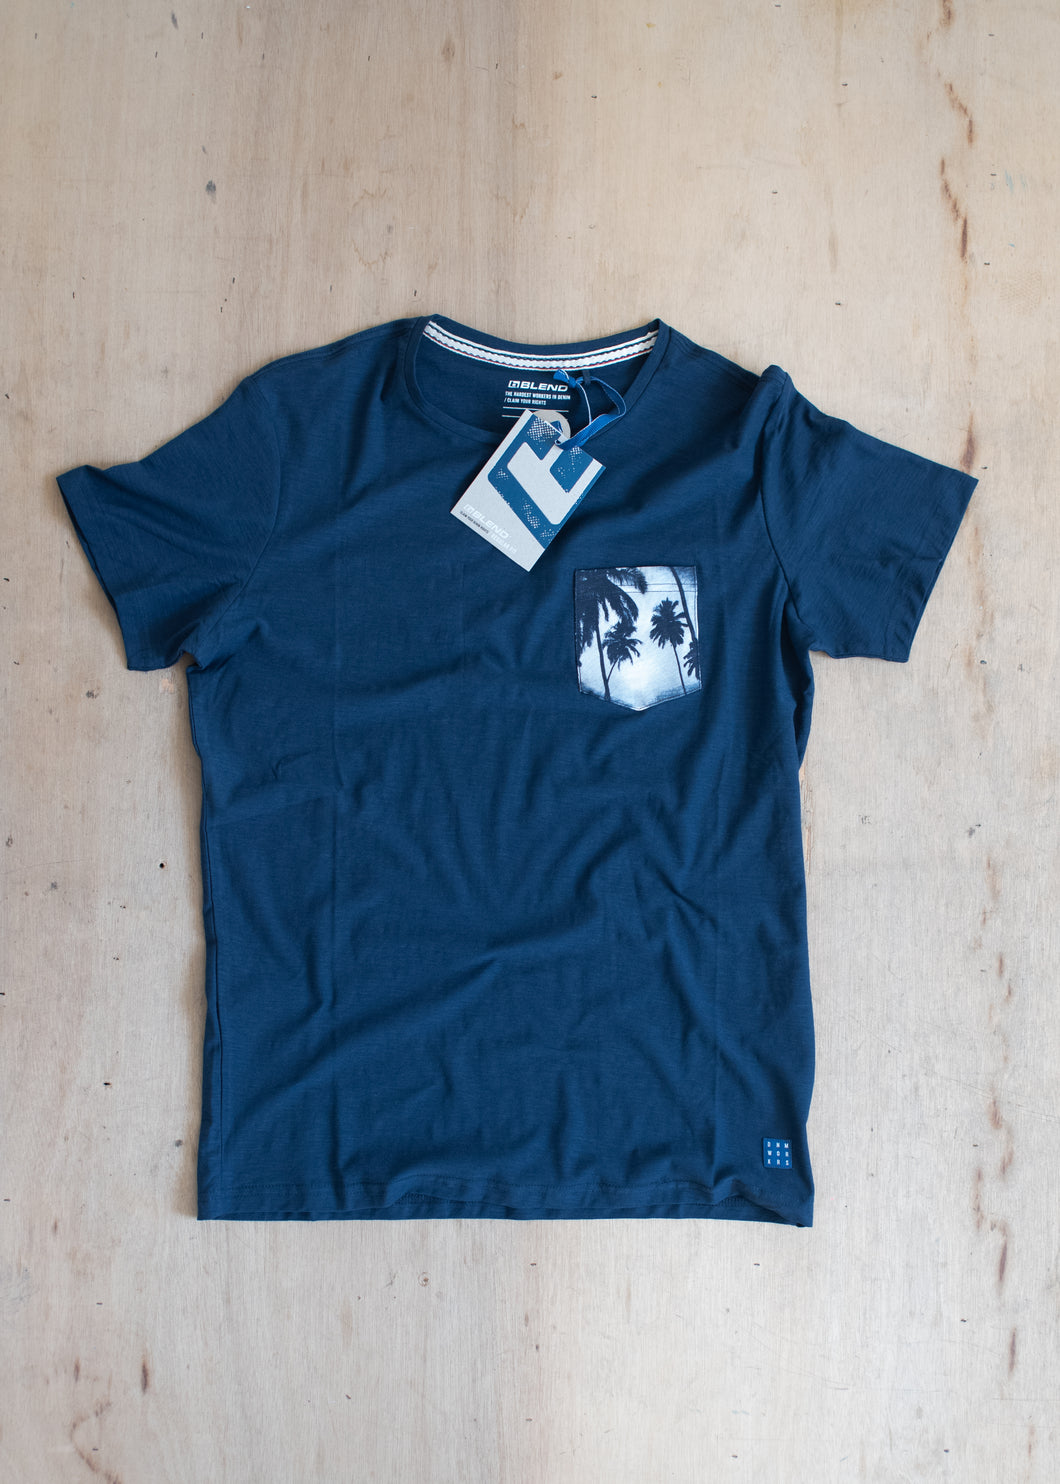 Navy T-Shirt White Palm. Summer t shirt from Blend in a range of sizes.